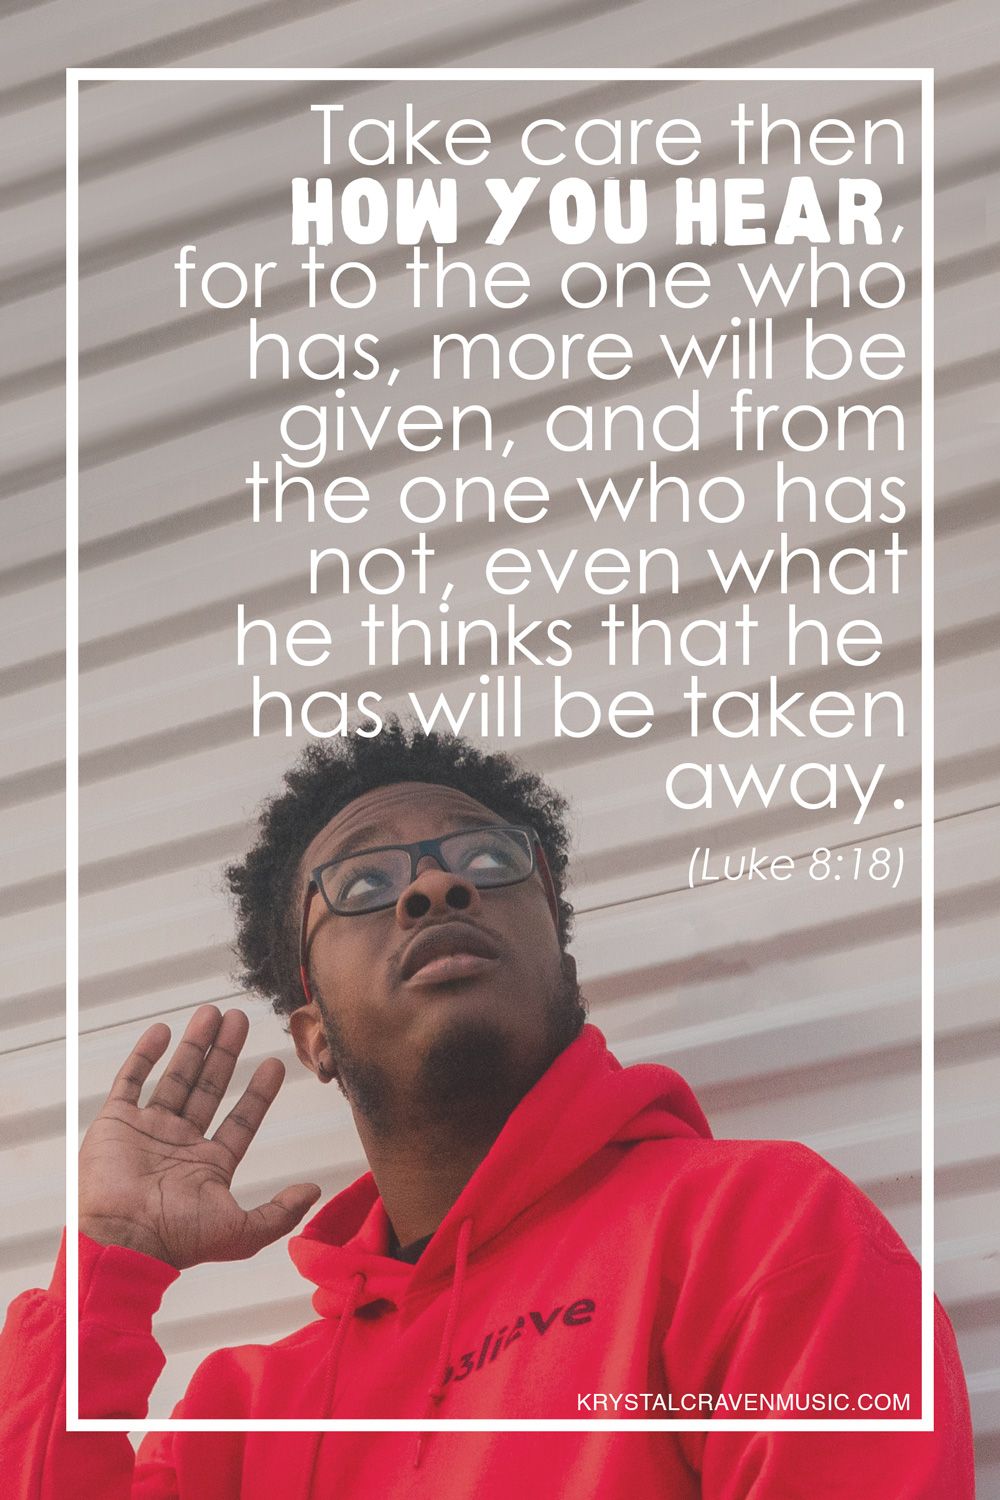 The bible verse Luke 8:18 "Take care then how you hear, for to the one who has, more will be given, and from the one who has not, even what he thinks that he has will be taken away" overlaying a man in a red hoodie sweatshirt holding his hand up to his ear while looking up.